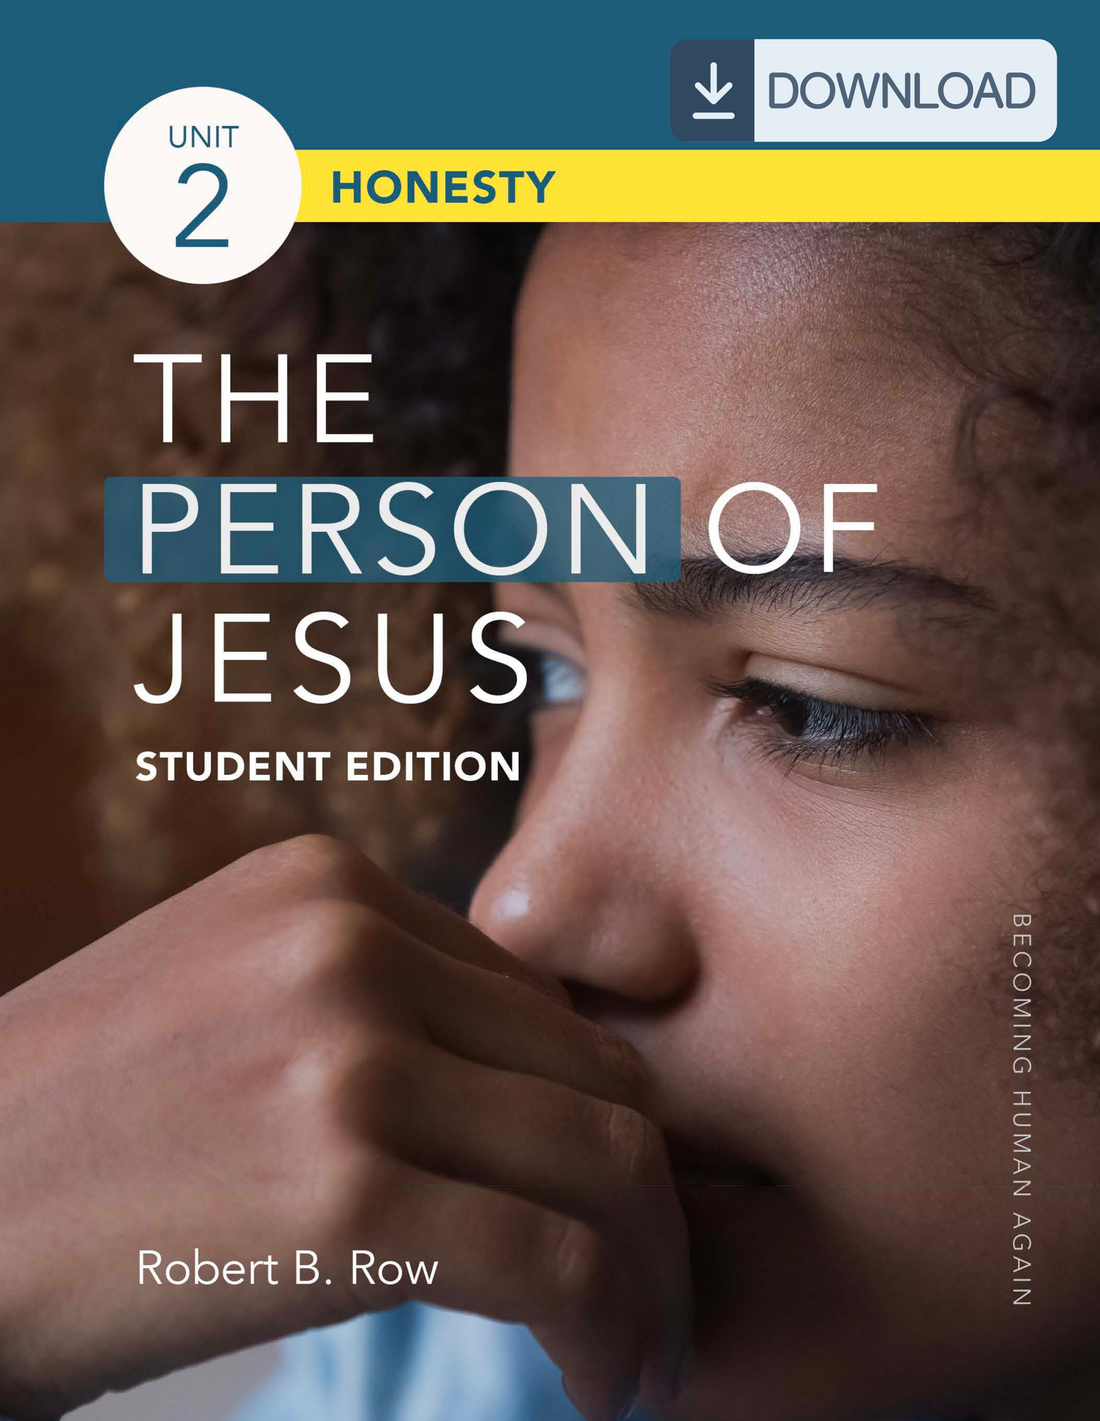 The Person of Jesus--Student Edition, Unit 2: Honesty Student Guide (PDF)